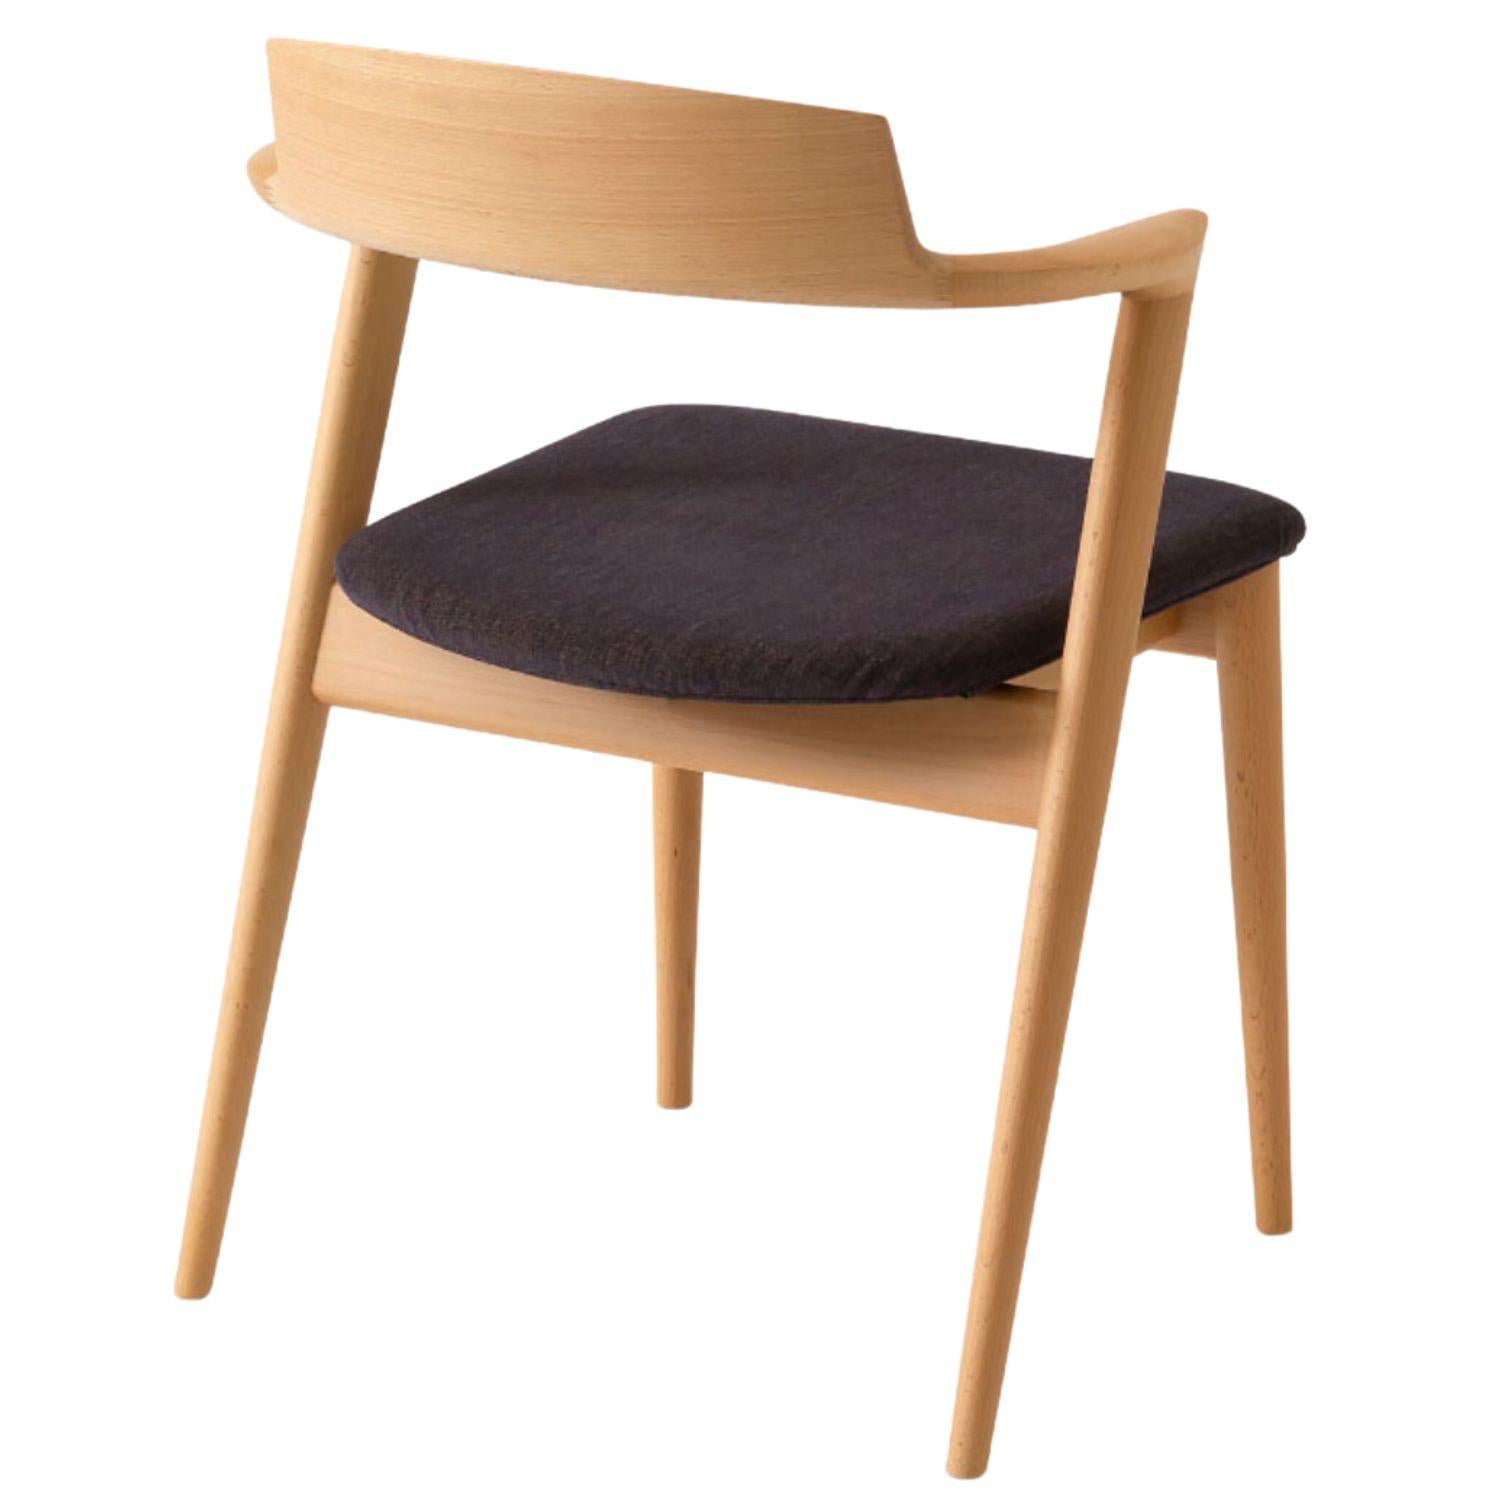 Motomi Kawakami 'Seoto KD20' semi-arm upholstered beech dining chair for Hida.

For centuries, famed Hida artisans in Gifu prefecture have played a role in Japan's woodworking culture, crafting iconic bentwood furniture from sustainable local